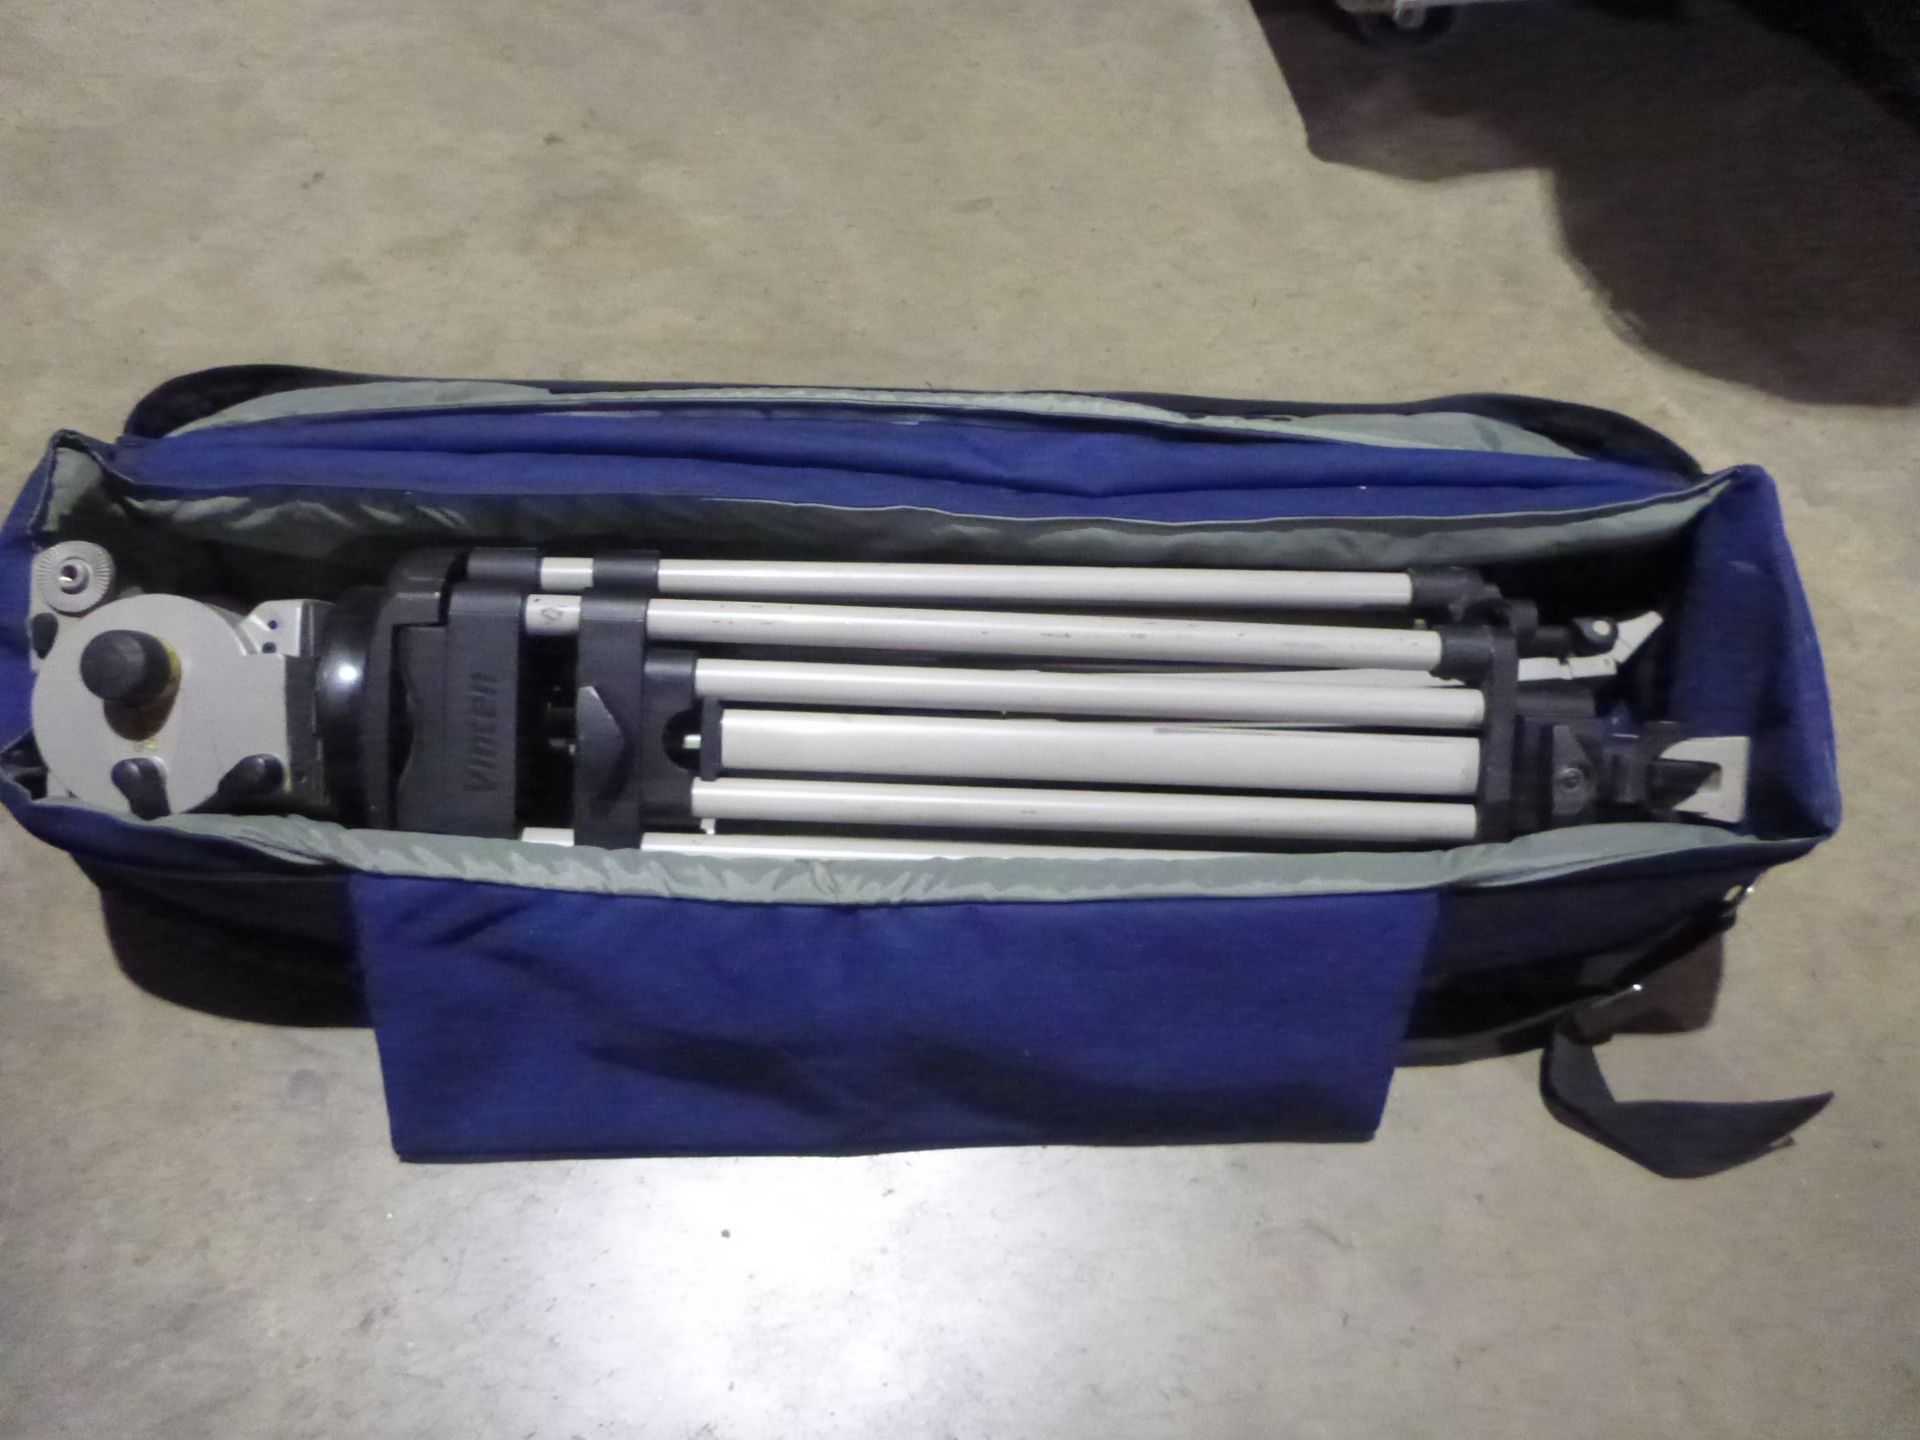 Vinton Camera Tripod, Model Vision 250, In carry case - Image 3 of 4